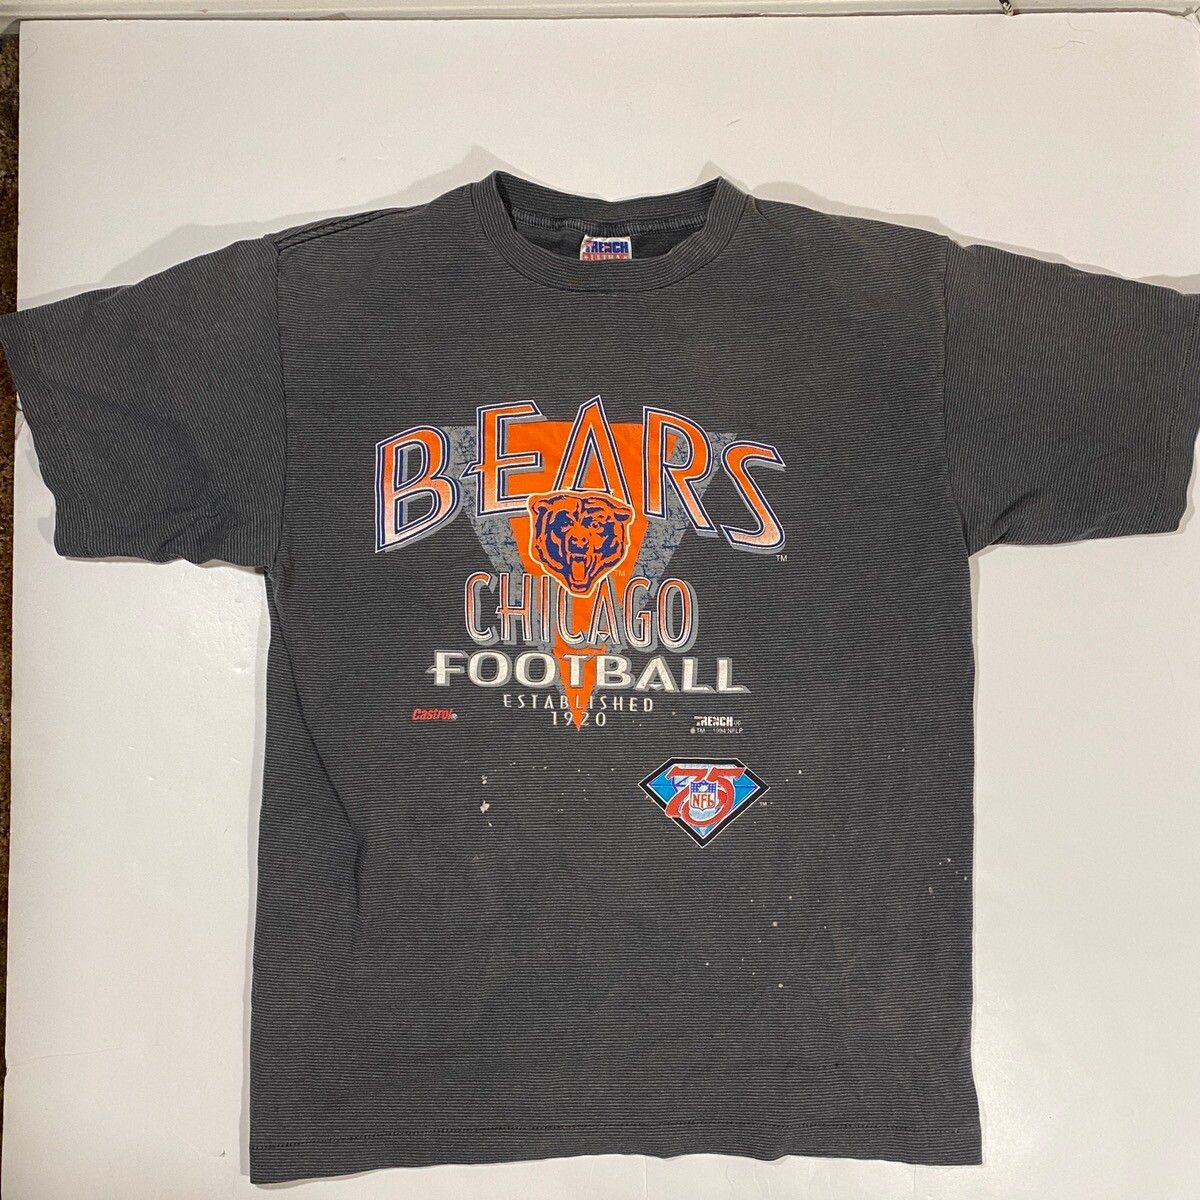 Vintage 90’s NFL Chicago Bears Tee Size US XL / EU 56 / 4 - 1 Preview